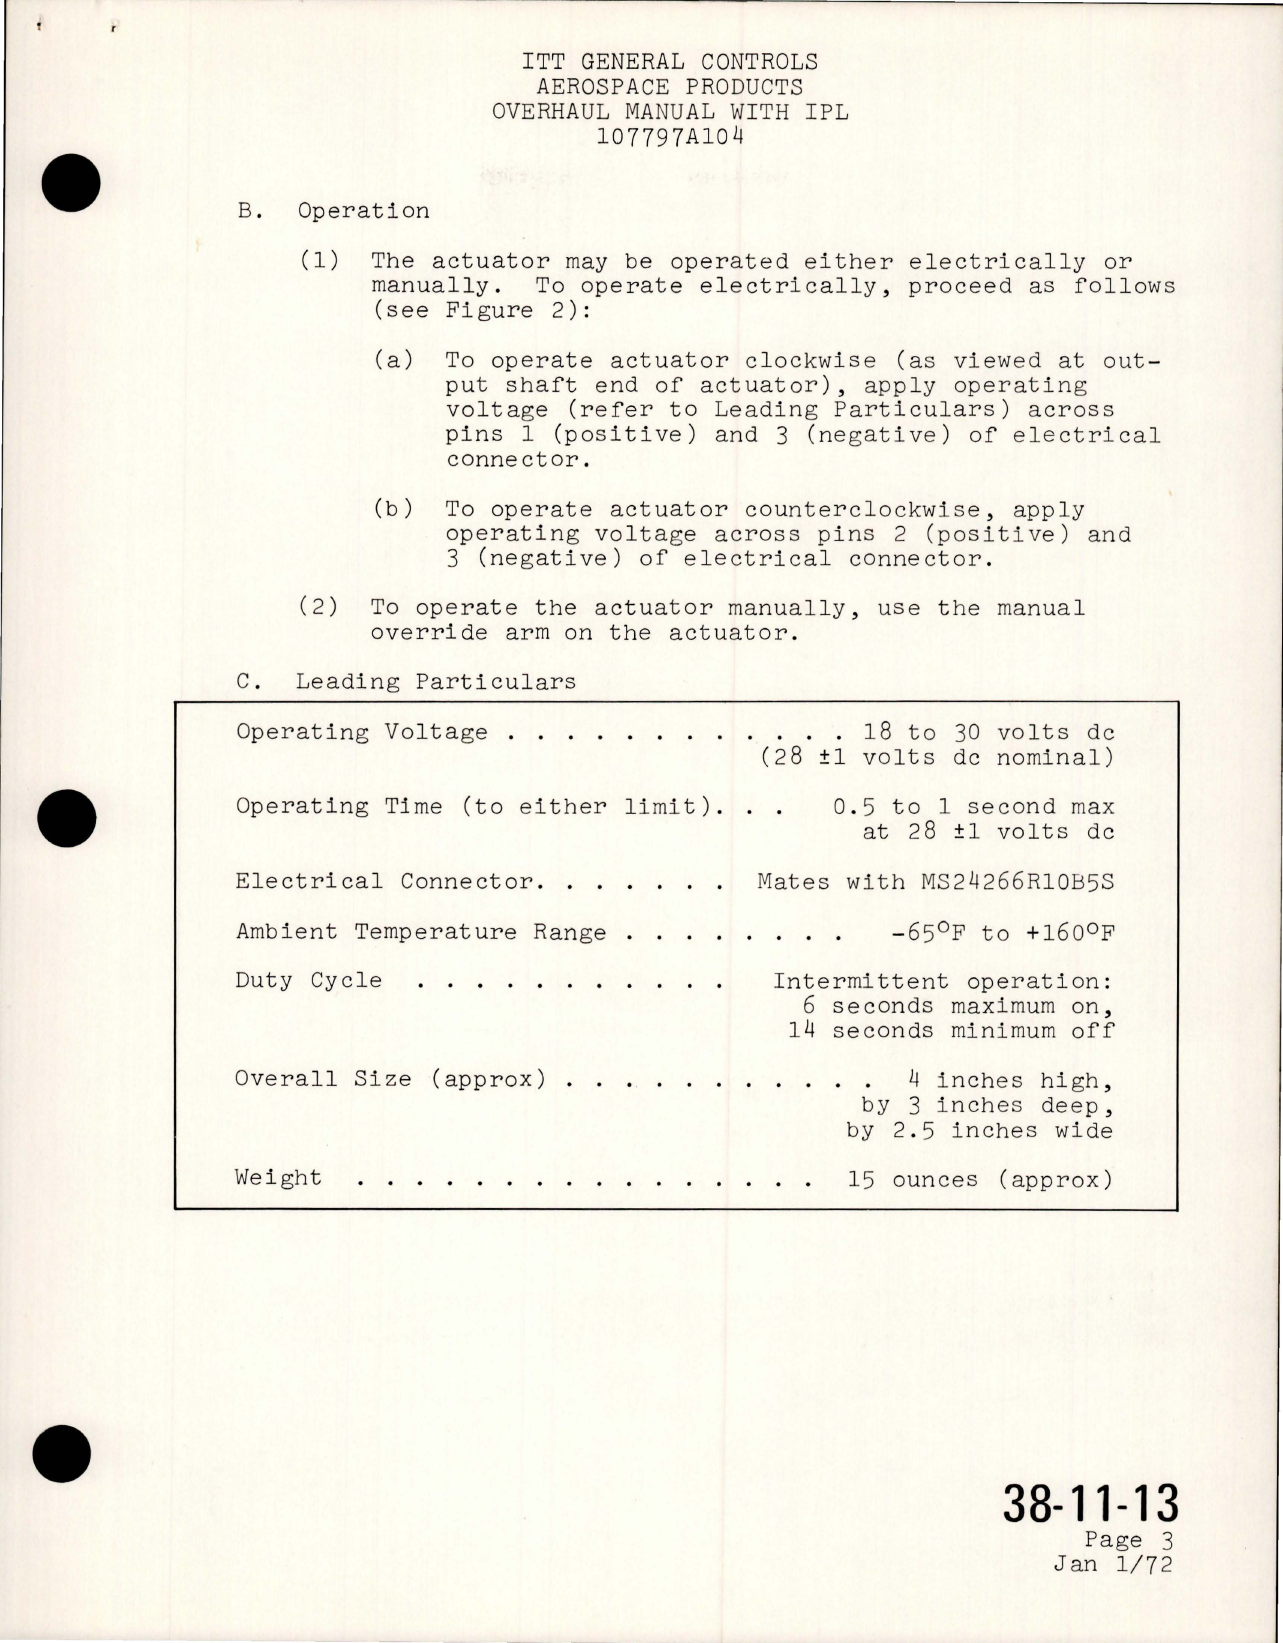 Sample page 9 from AirCorps Library document: Overhaul w Illustrated Parts List for Actuator - Part 107797A104 